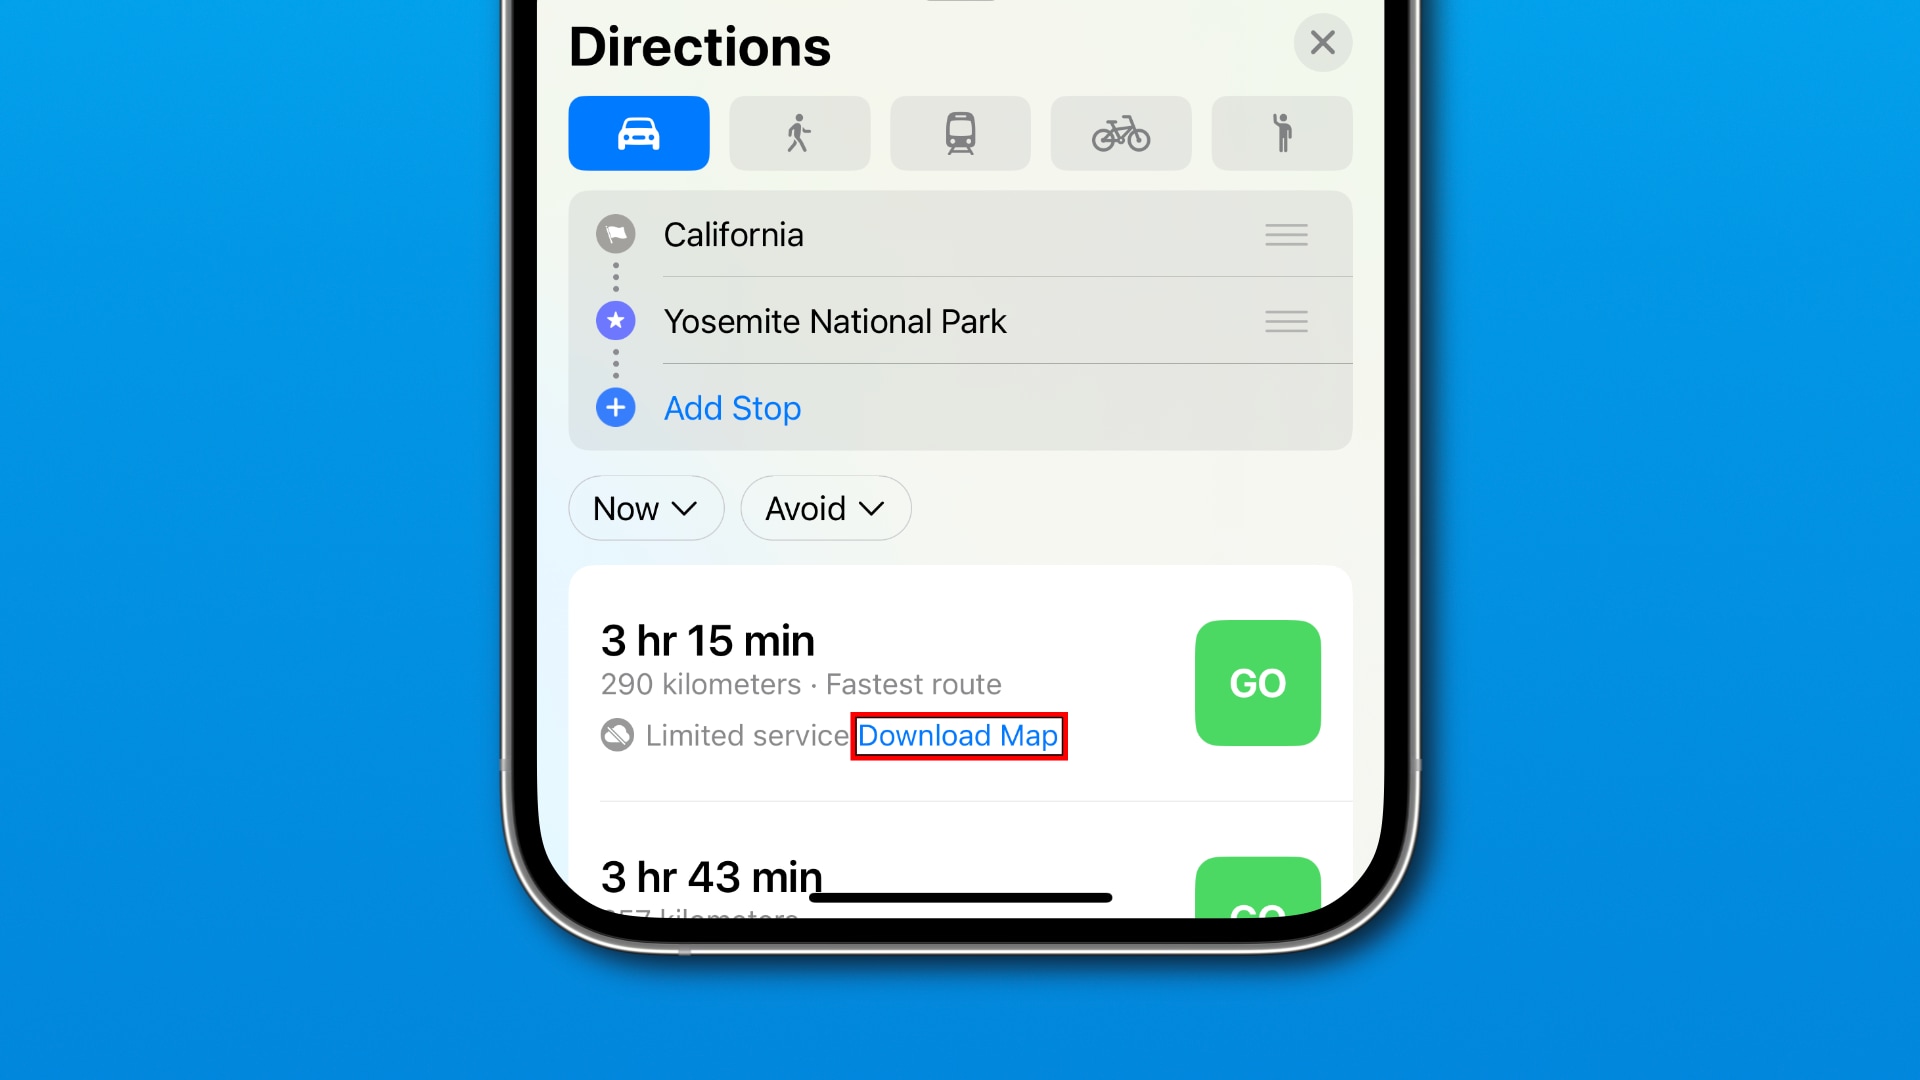 The Download Map link when planning a route in iOS 17's Maps app